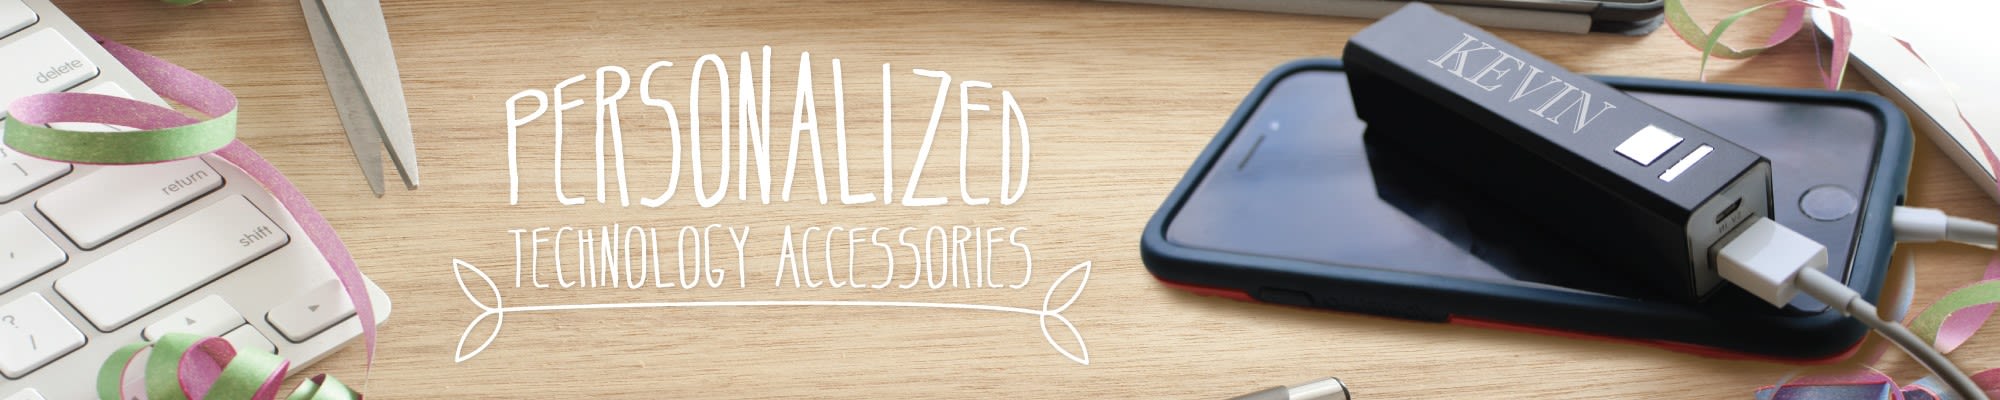 Personalized Technology Accessories